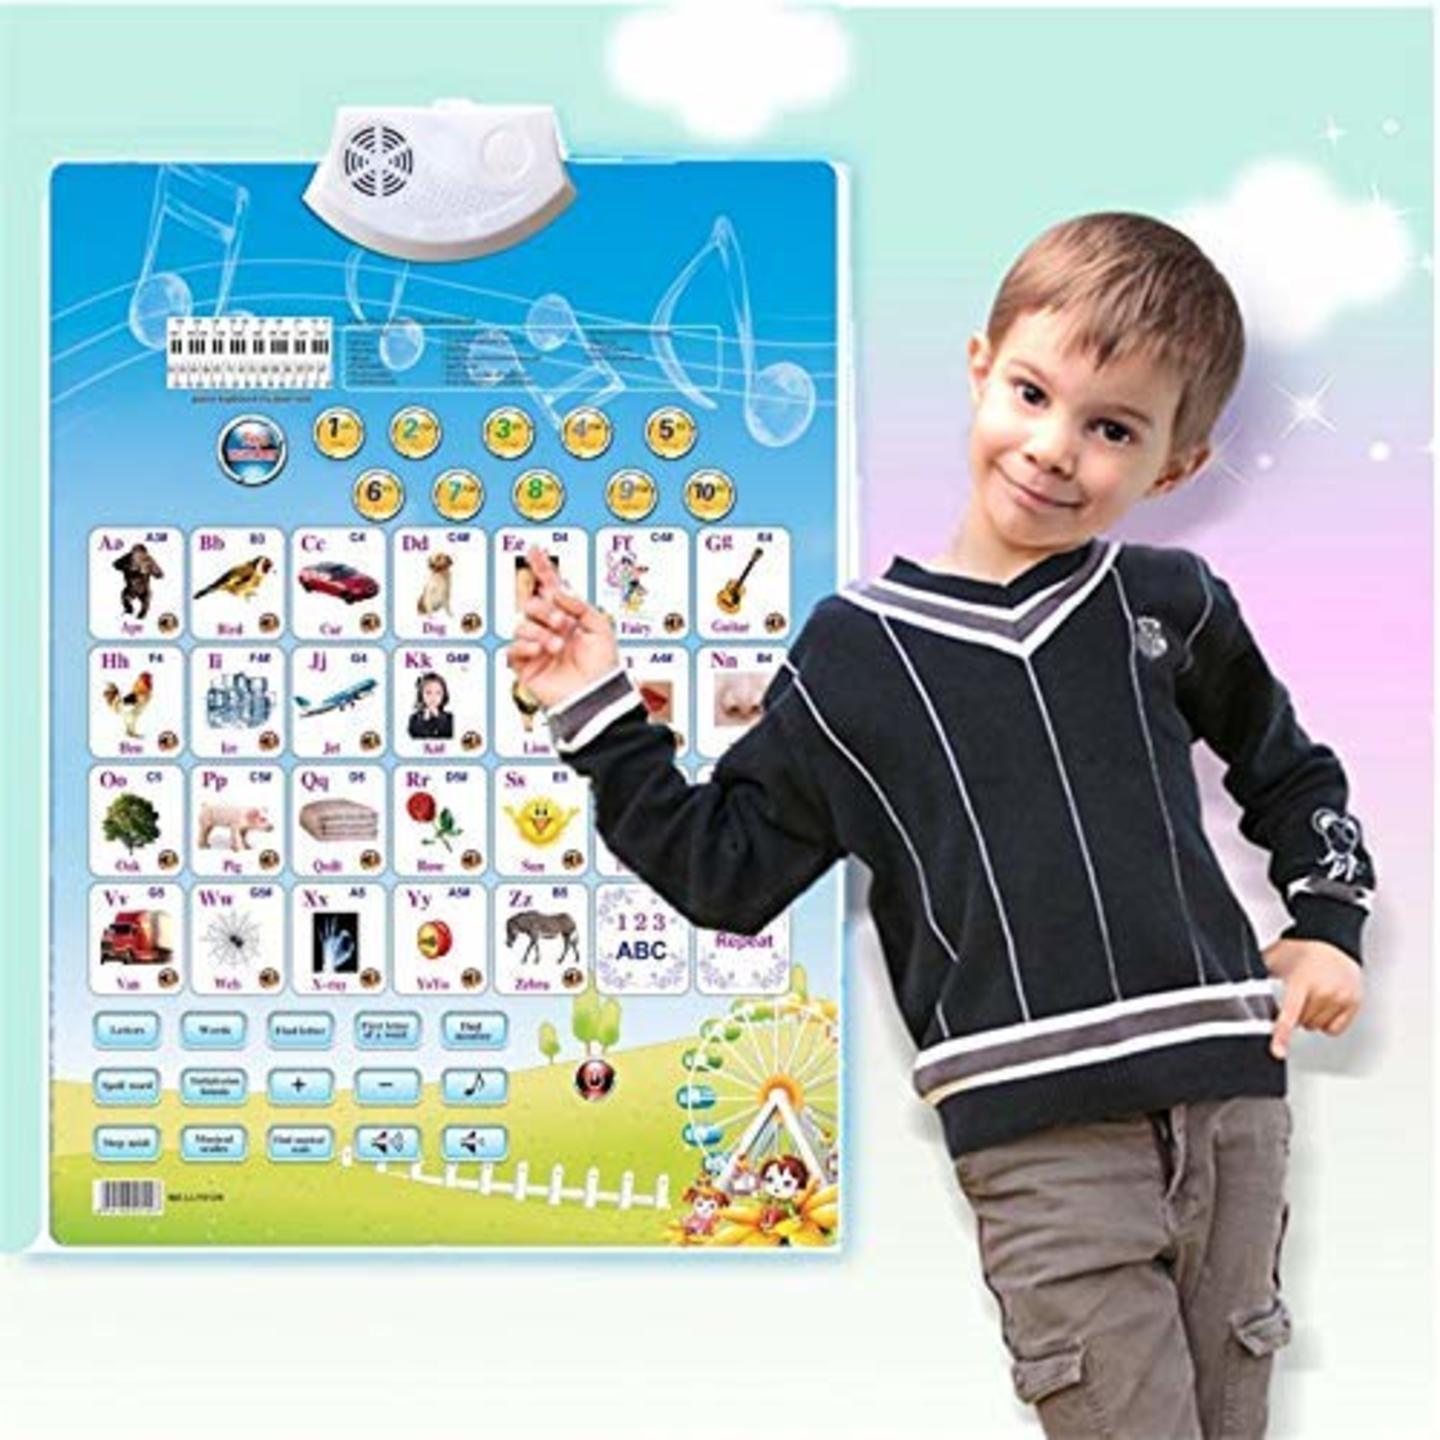 TipTap Electronic 3D Sound wall charts for kids